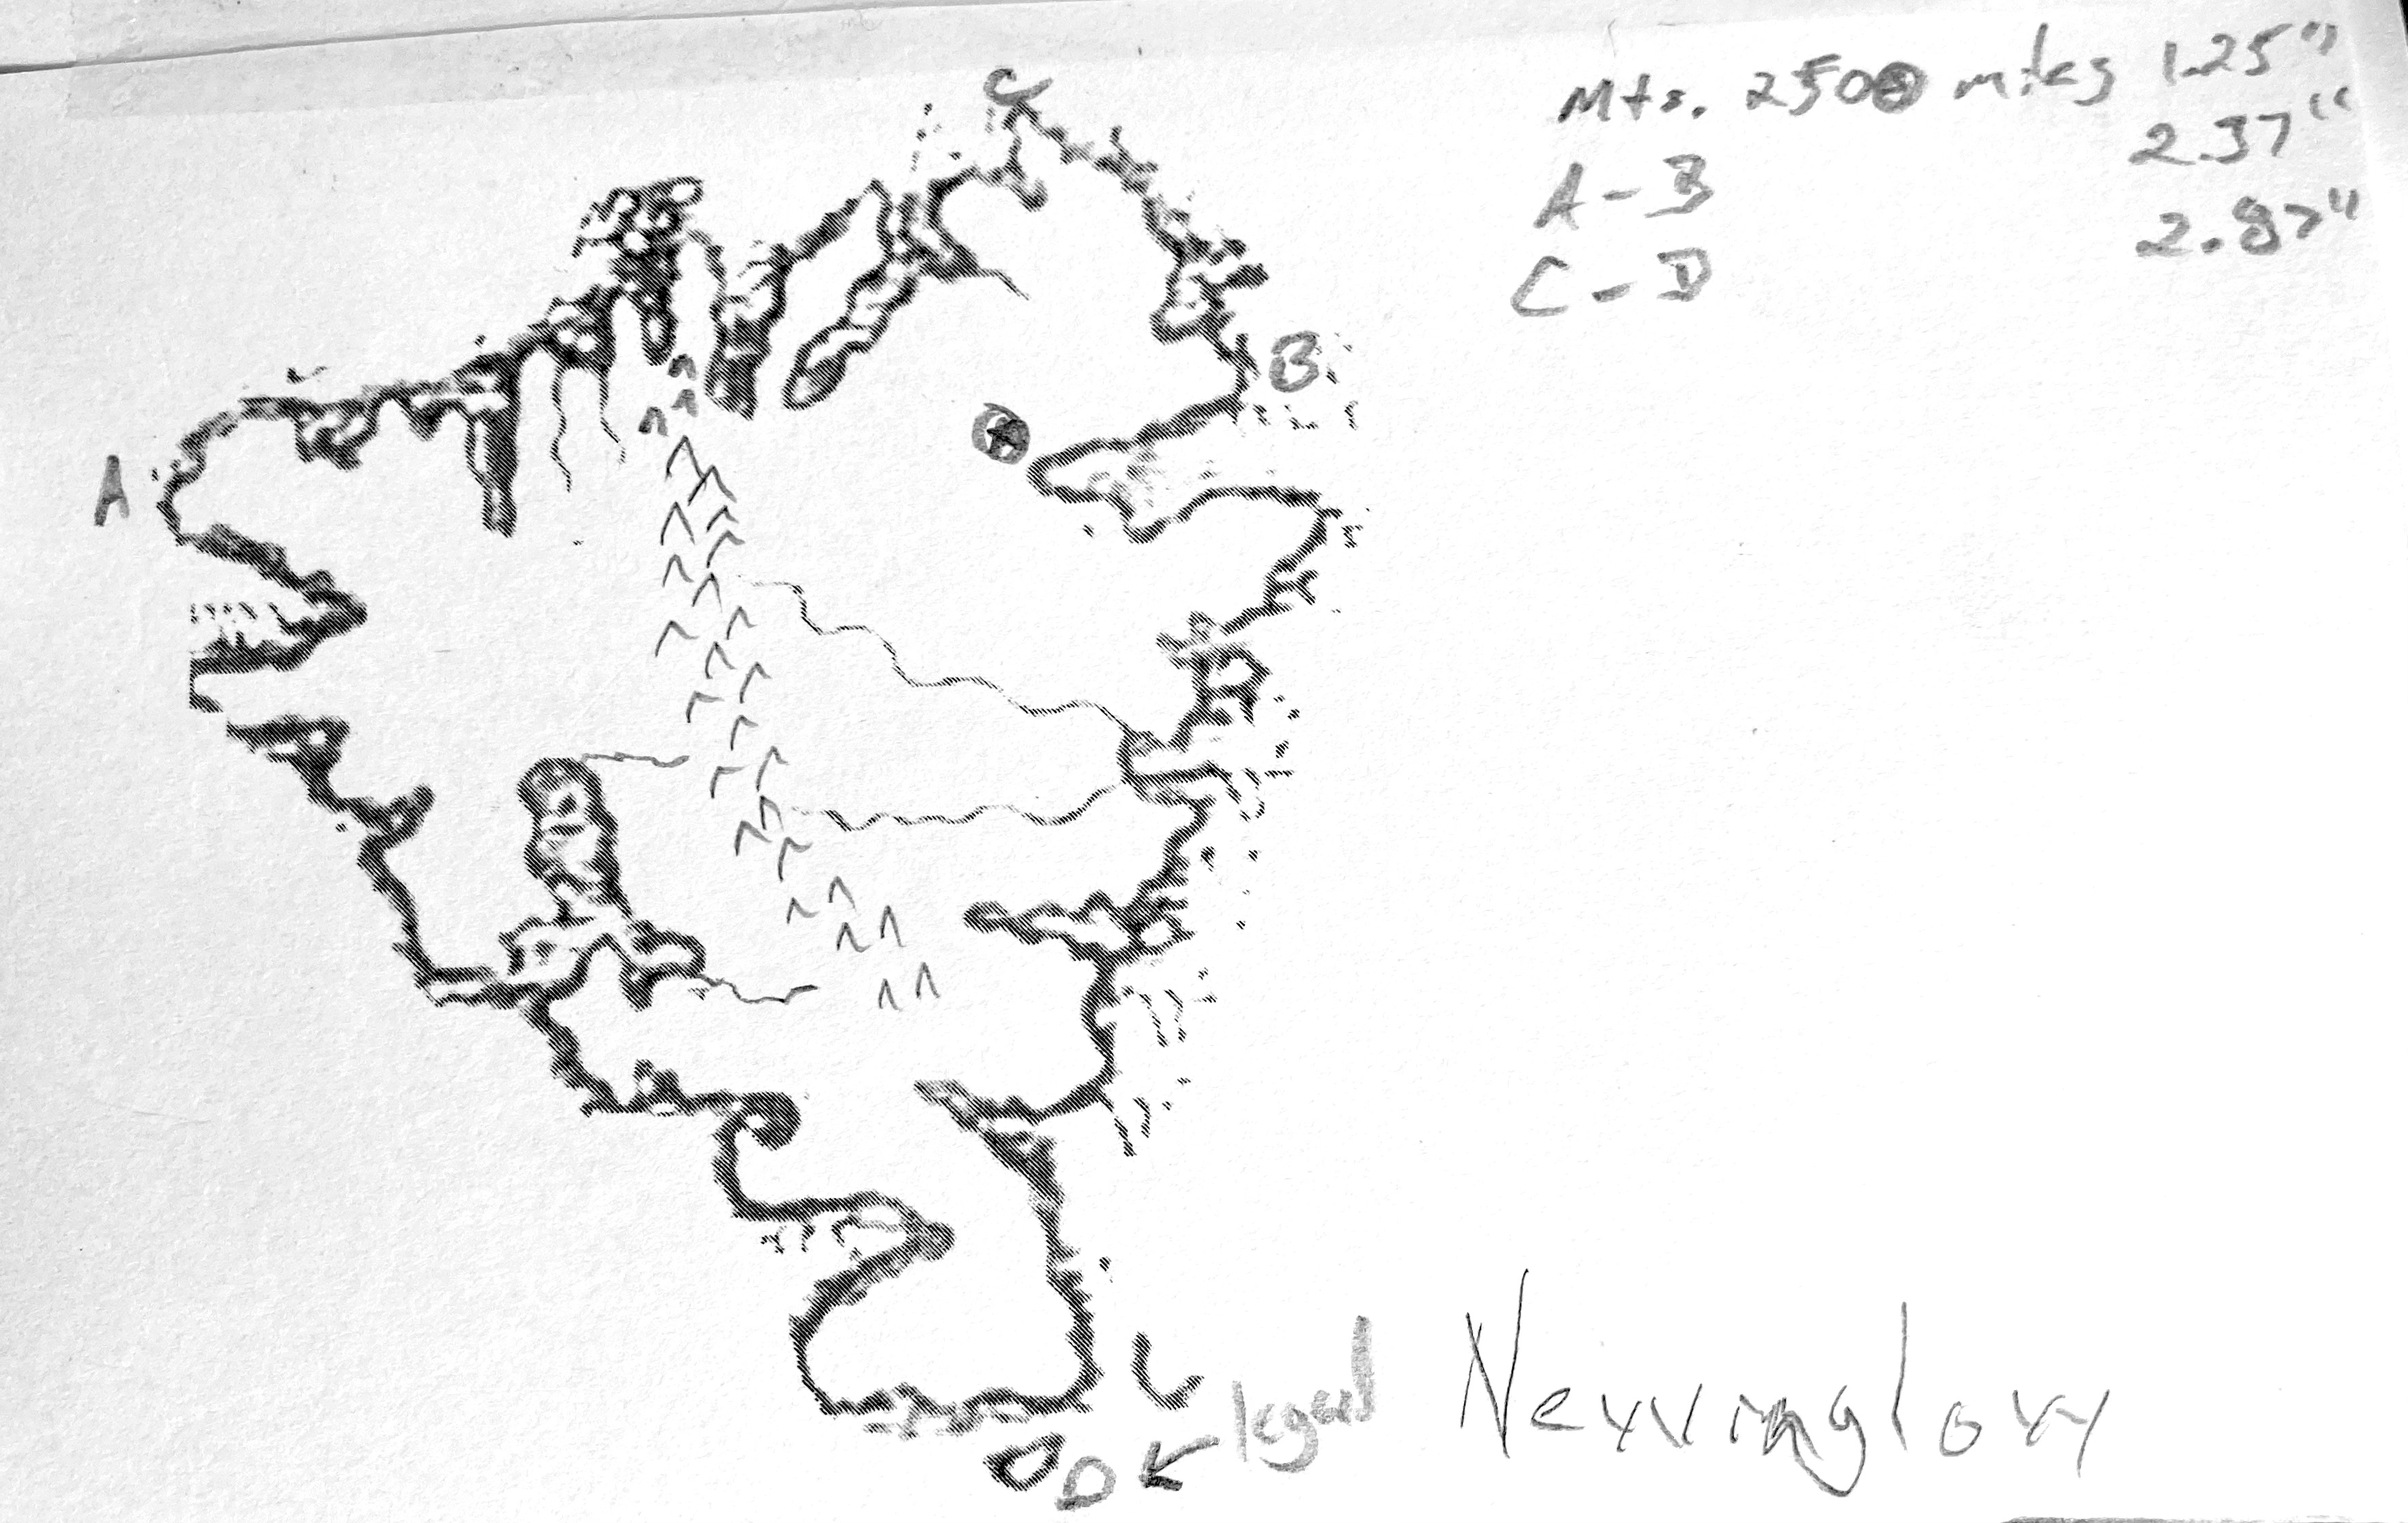 Black and white image. A line map of the fictional island continent of Newinglow showing a mountain range, major rivers, and coastal features such as gulfs, bays, and fjiords. Notations identify certain locations for scale.